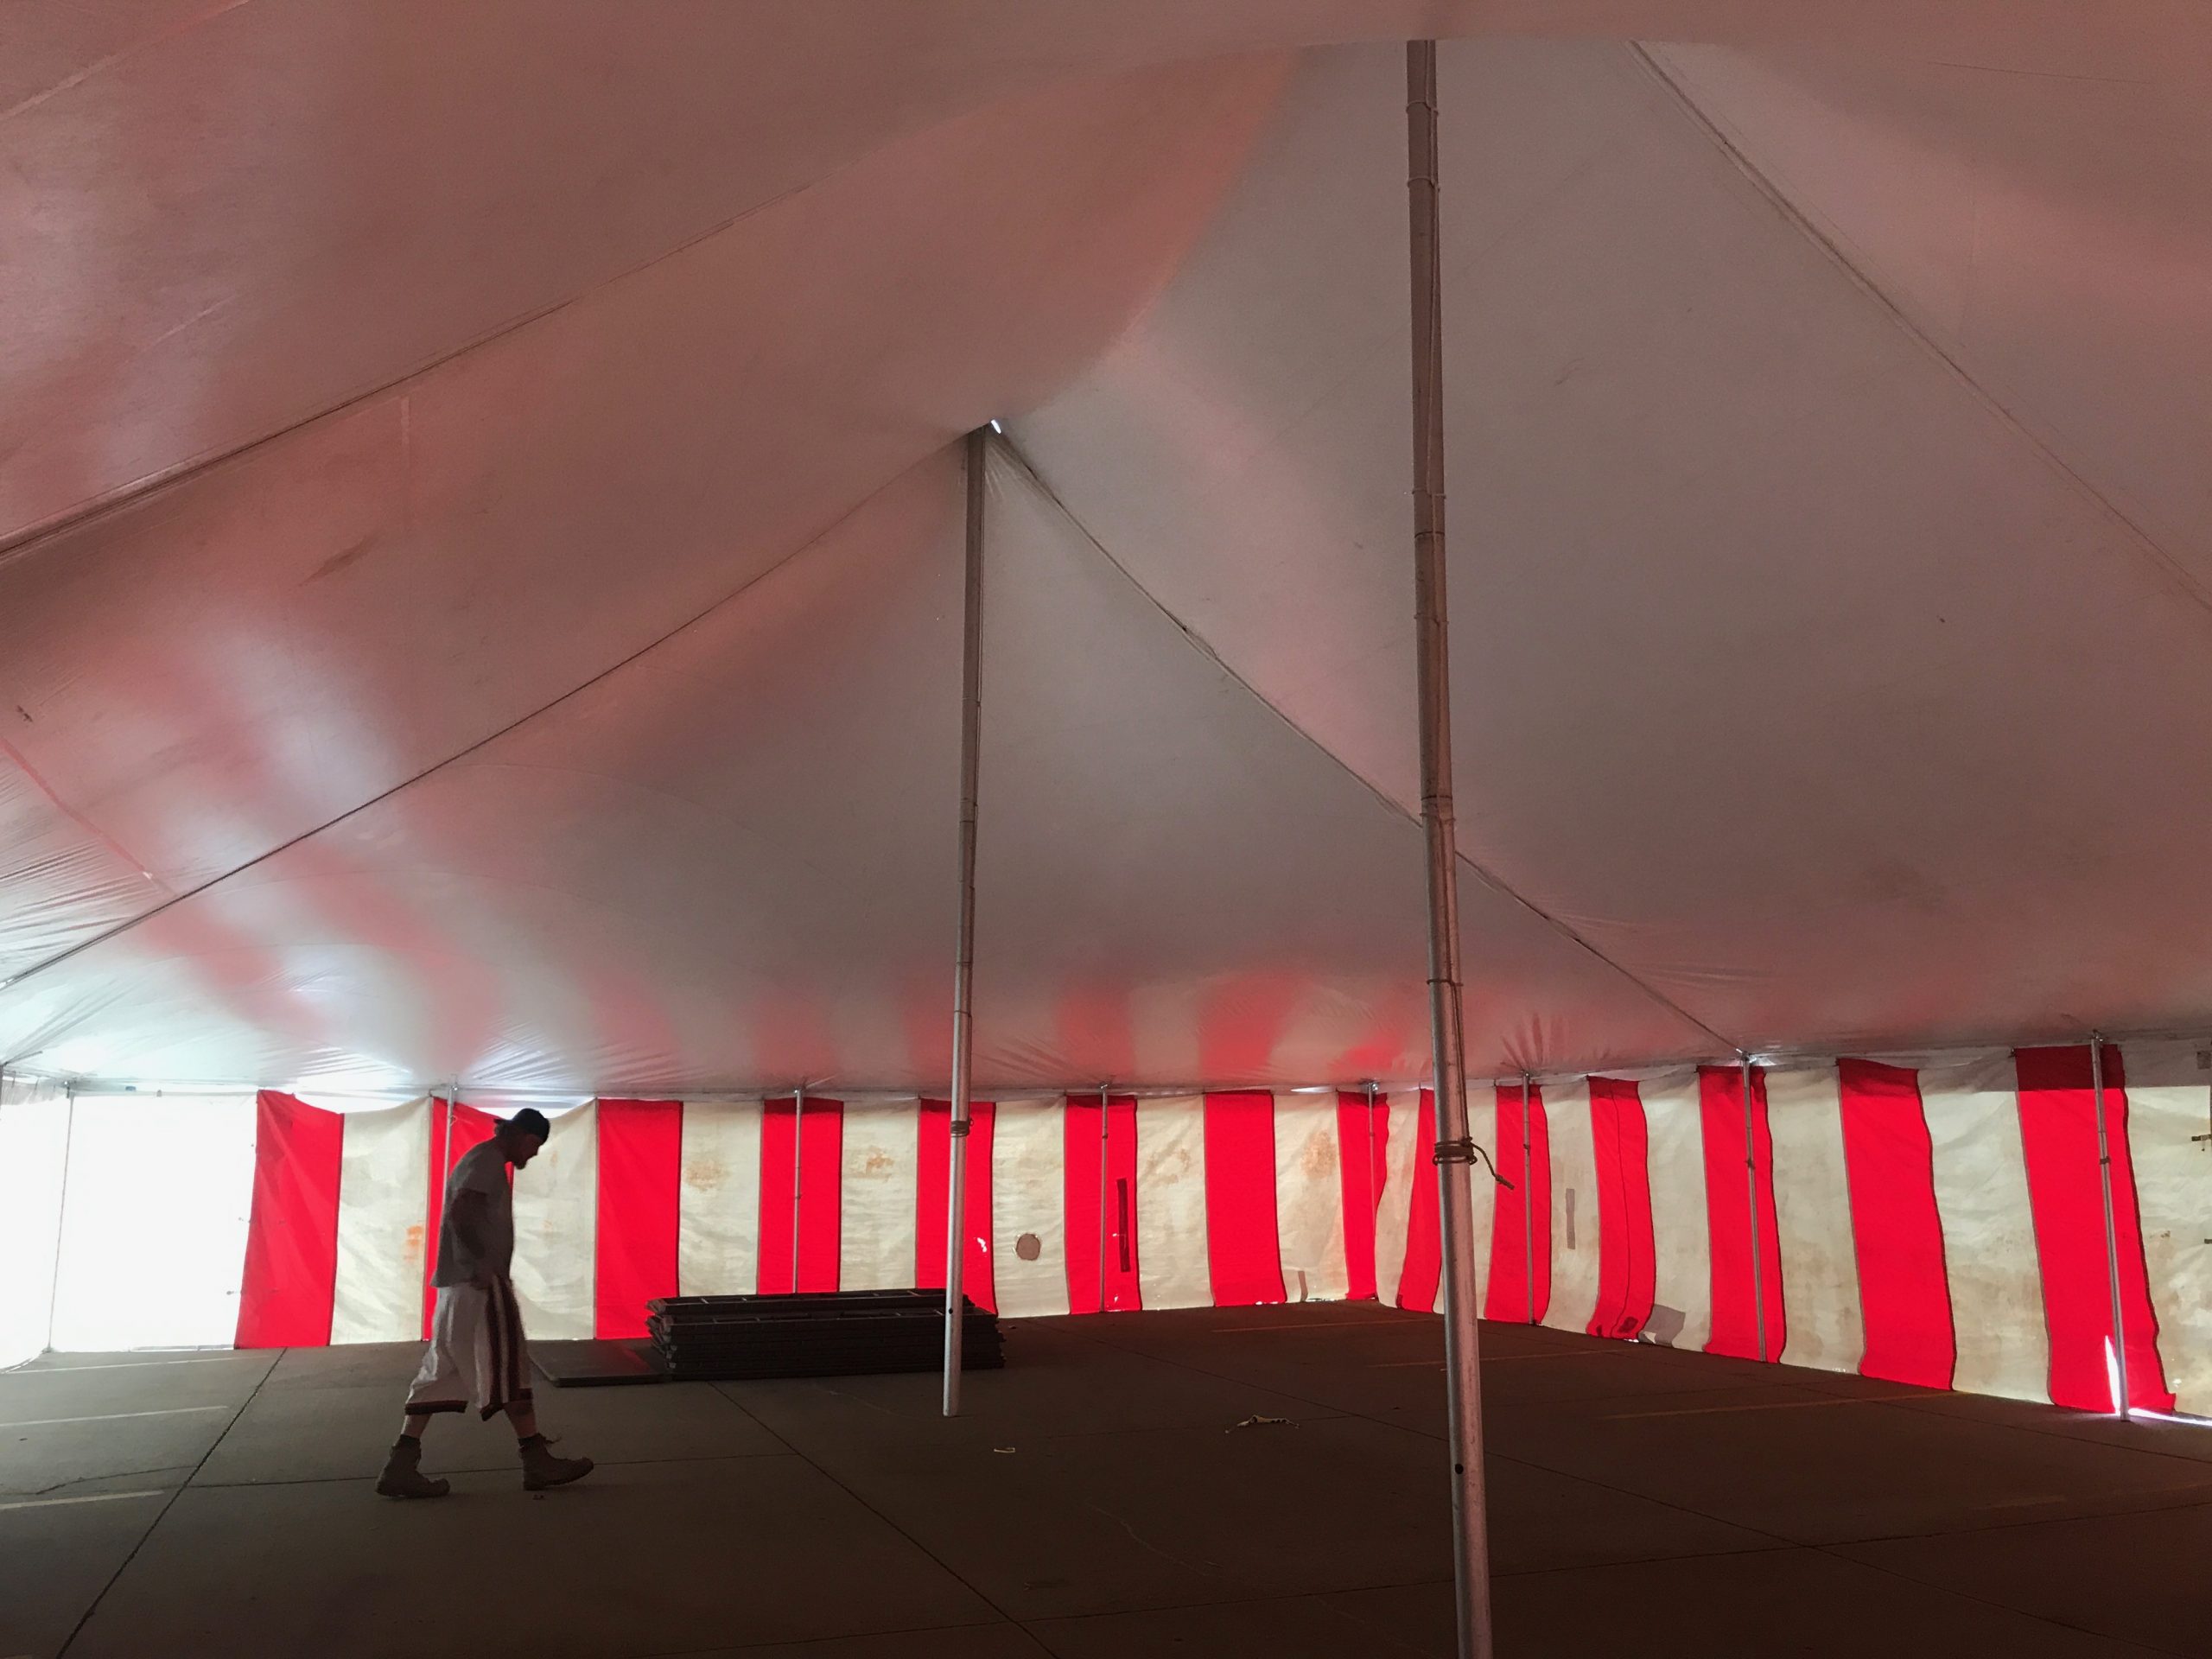 Under a 40' x 60' rope and pole tent with Red and White Sidewall used for Fireworks tent at Hy-Vee in Cedar Rapids, Iowa